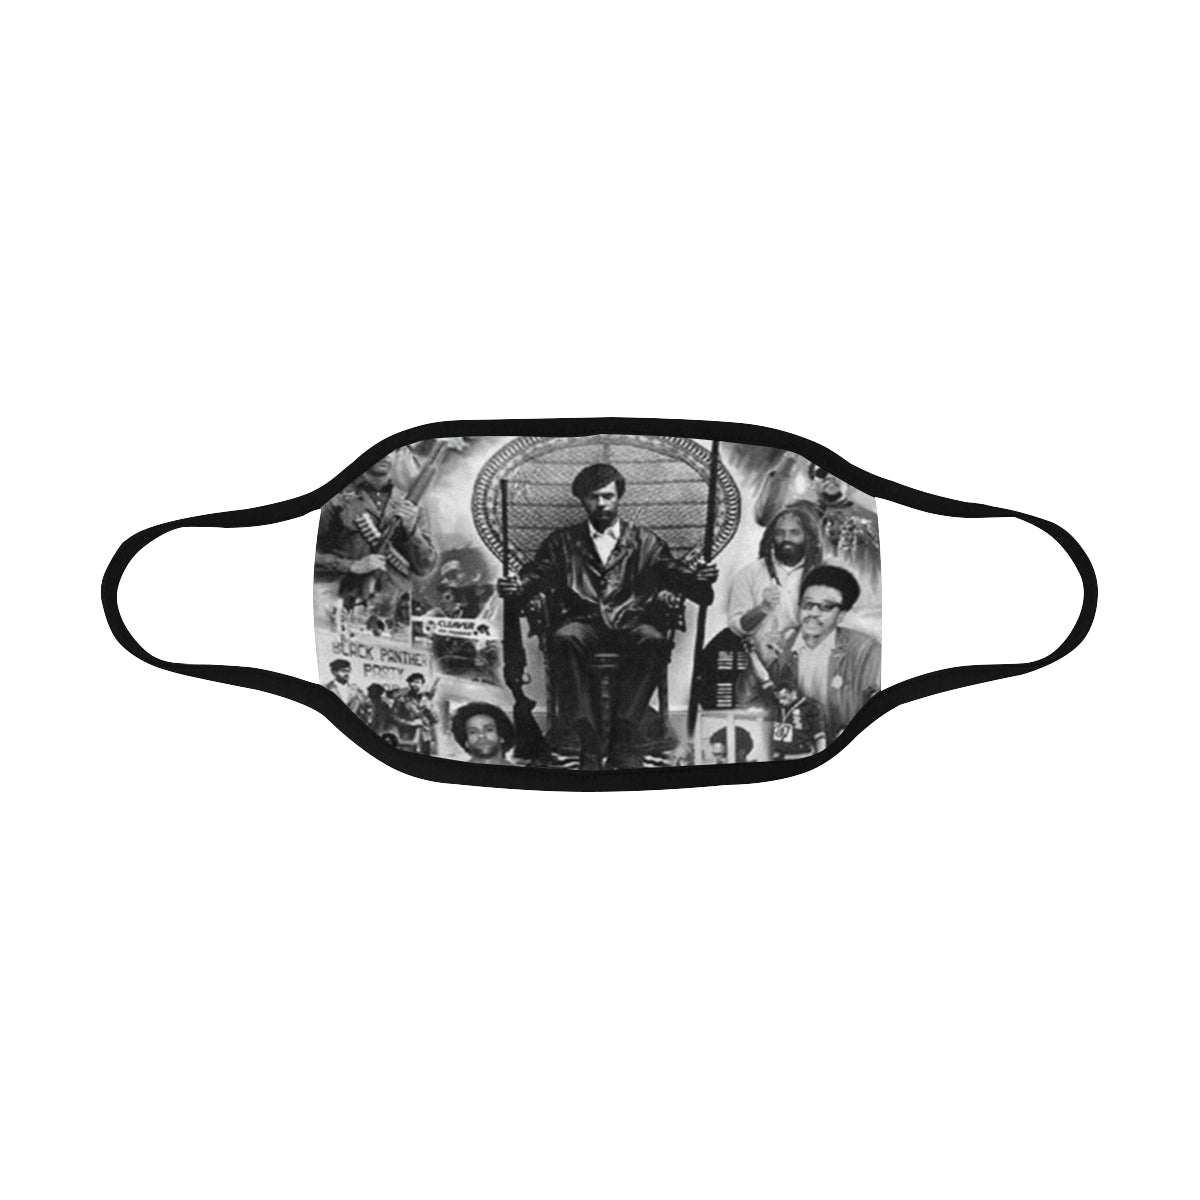 BLACK PANTHER PARTY Mouth Mask in One Piece (2 Filters Included)